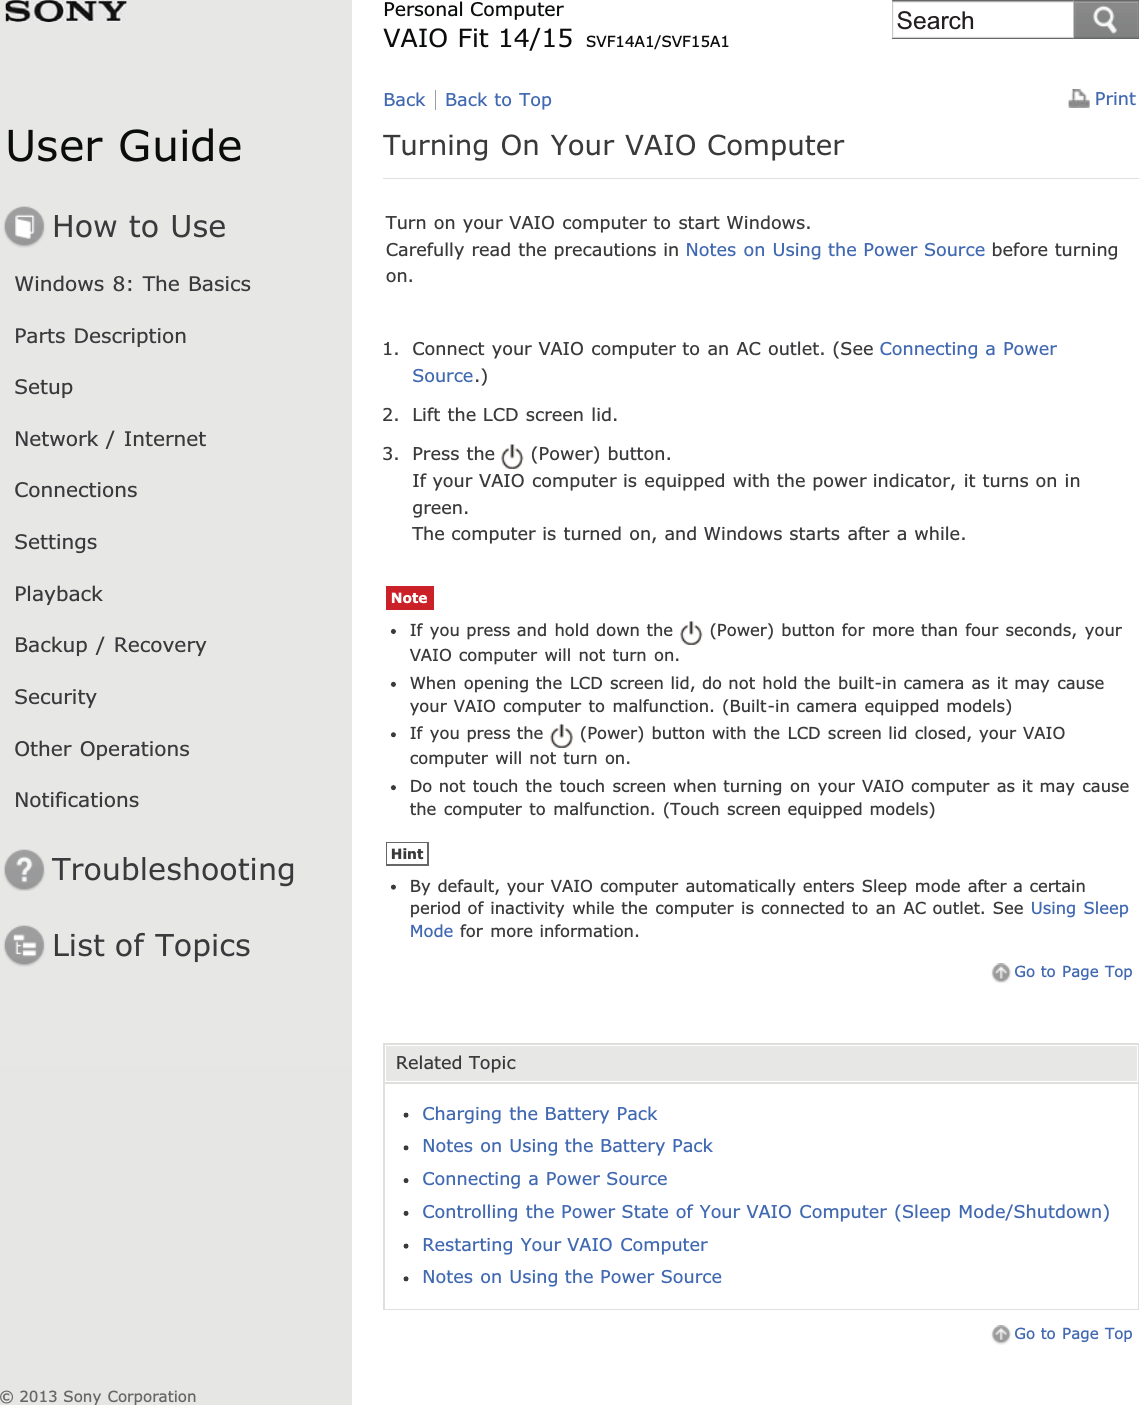 User GuideHow to UseWindows 8: The BasicsParts DescriptionSetupNetwork / InternetConnectionsSettingsPlaybackBackup / RecoverySecurityOther OperationsNotificationsTroubleshootingList of TopicsPrintPersonal ComputerVAIO Fit 14/15 SVF14A1/SVF15A1Turning On Your VAIO ComputerTurn on your VAIO computer to start Windows.Carefully read the precautions in Notes on Using the Power Source before turningon.1. Connect your VAIO computer to an AC outlet. (See Connecting a PowerSource.)2. Lift the LCD screen lid.3. Press the (Power) button.If your VAIO computer is equipped with the power indicator, it turns on ingreen.The computer is turned on, and Windows starts after a while.NoteIf you press and hold down the (Power) button for more than four seconds, yourVAIO computer will not turn on.When opening the LCD screen lid, do not hold the built-in camera as it may causeyour VAIO computer to malfunction. (Built-in camera equipped models)If you press the (Power) button with the LCD screen lid closed, your VAIOcomputer will not turn on.Do not touch the touch screen when turning on your VAIO computer as it may causethe computer to malfunction. (Touch screen equipped models)HintBy default, your VAIO computer automatically enters Sleep mode after a certainperiod of inactivity while the computer is connected to an AC outlet. See Using SleepMode for more information.Go to Page TopRelated TopicCharging the Battery PackNotes on Using the Battery PackConnecting a Power SourceControlling the Power State of Your VAIO Computer (Sleep Mode/Shutdown)Restarting Your VAIO ComputerNotes on Using the Power SourceGo to Page TopBack Back to Top© 2013 Sony CorporationSearch